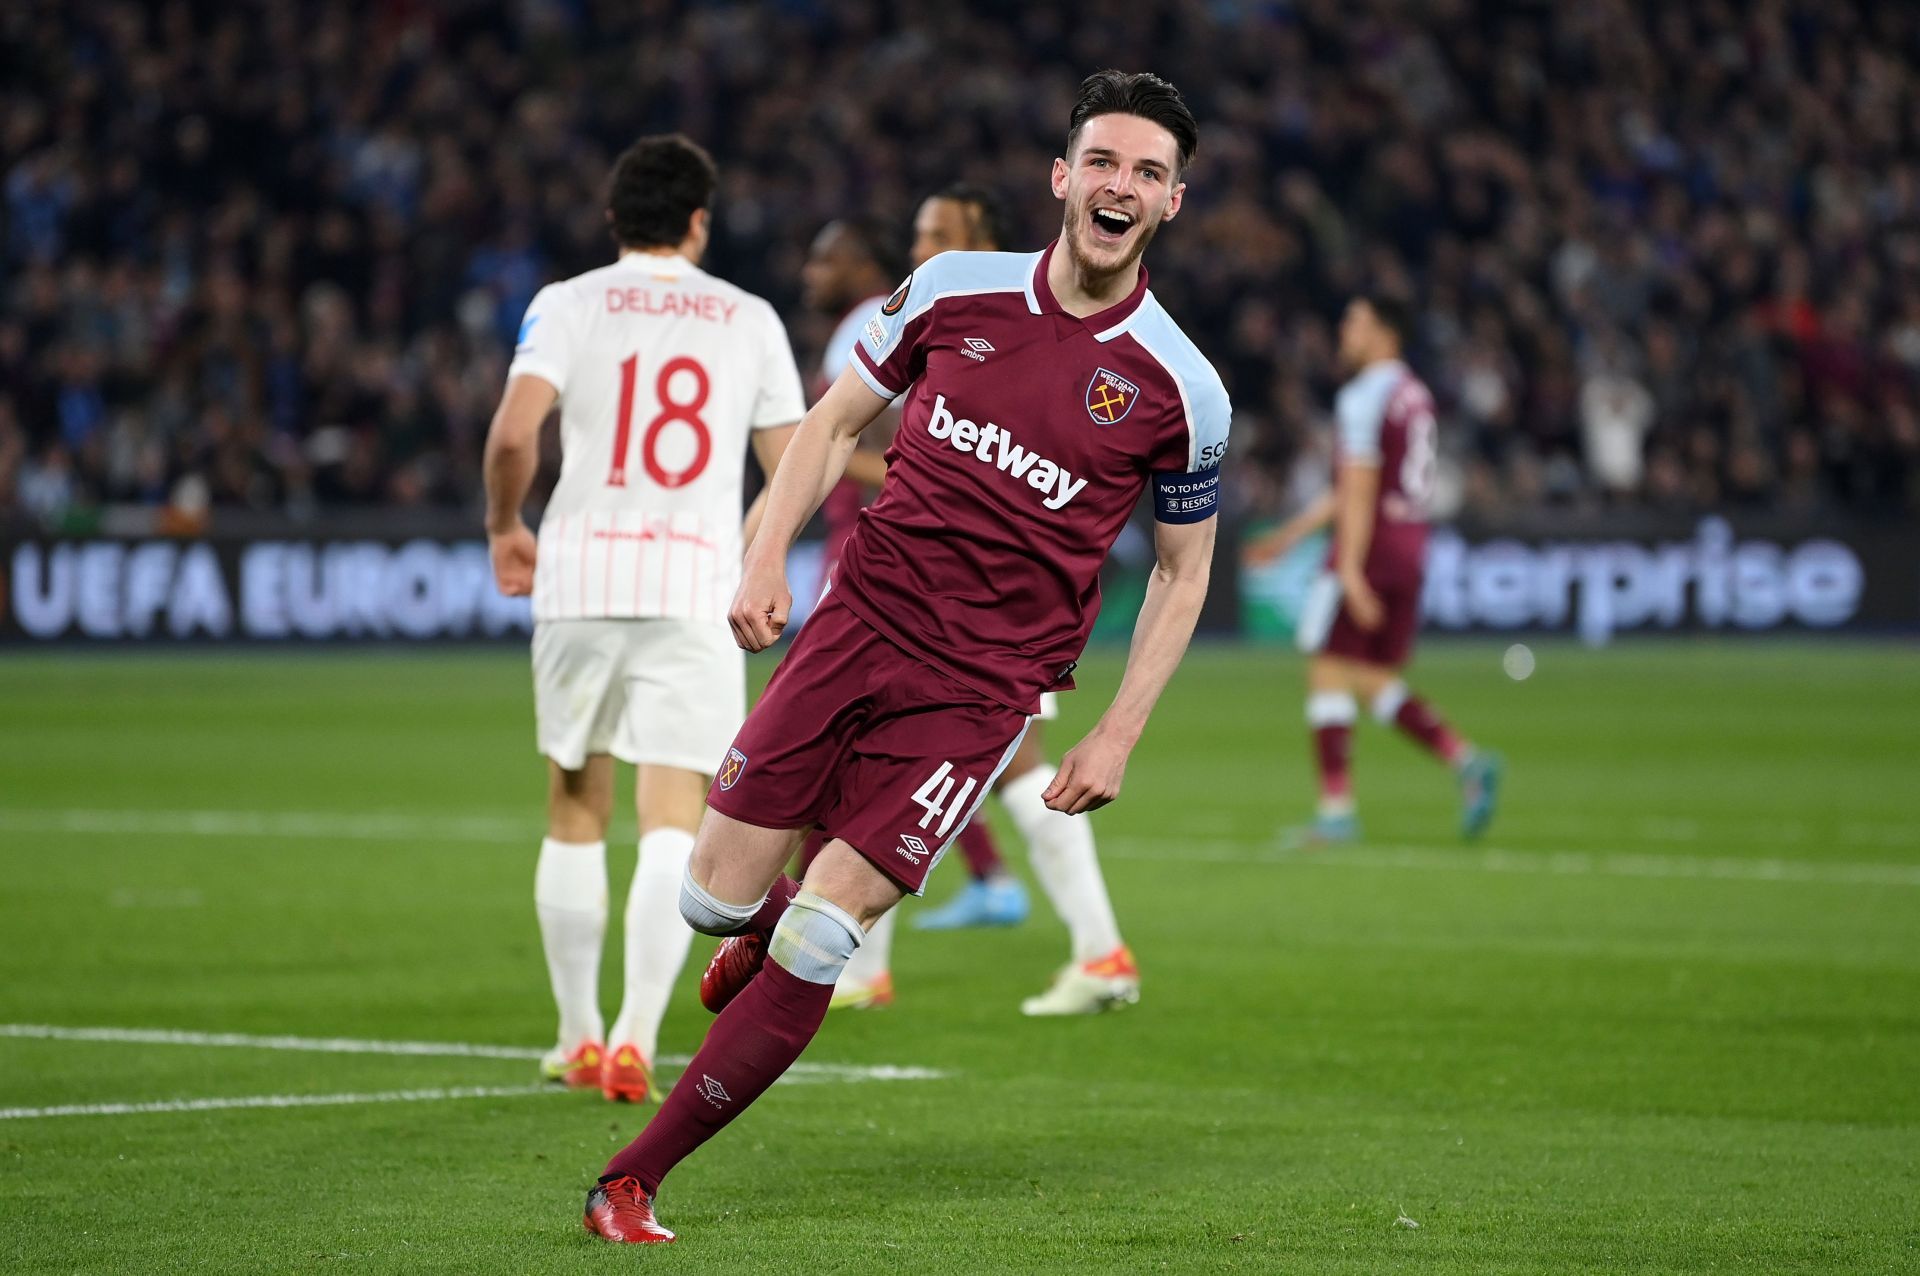 Declan Rice could leave West Ham United this summer.